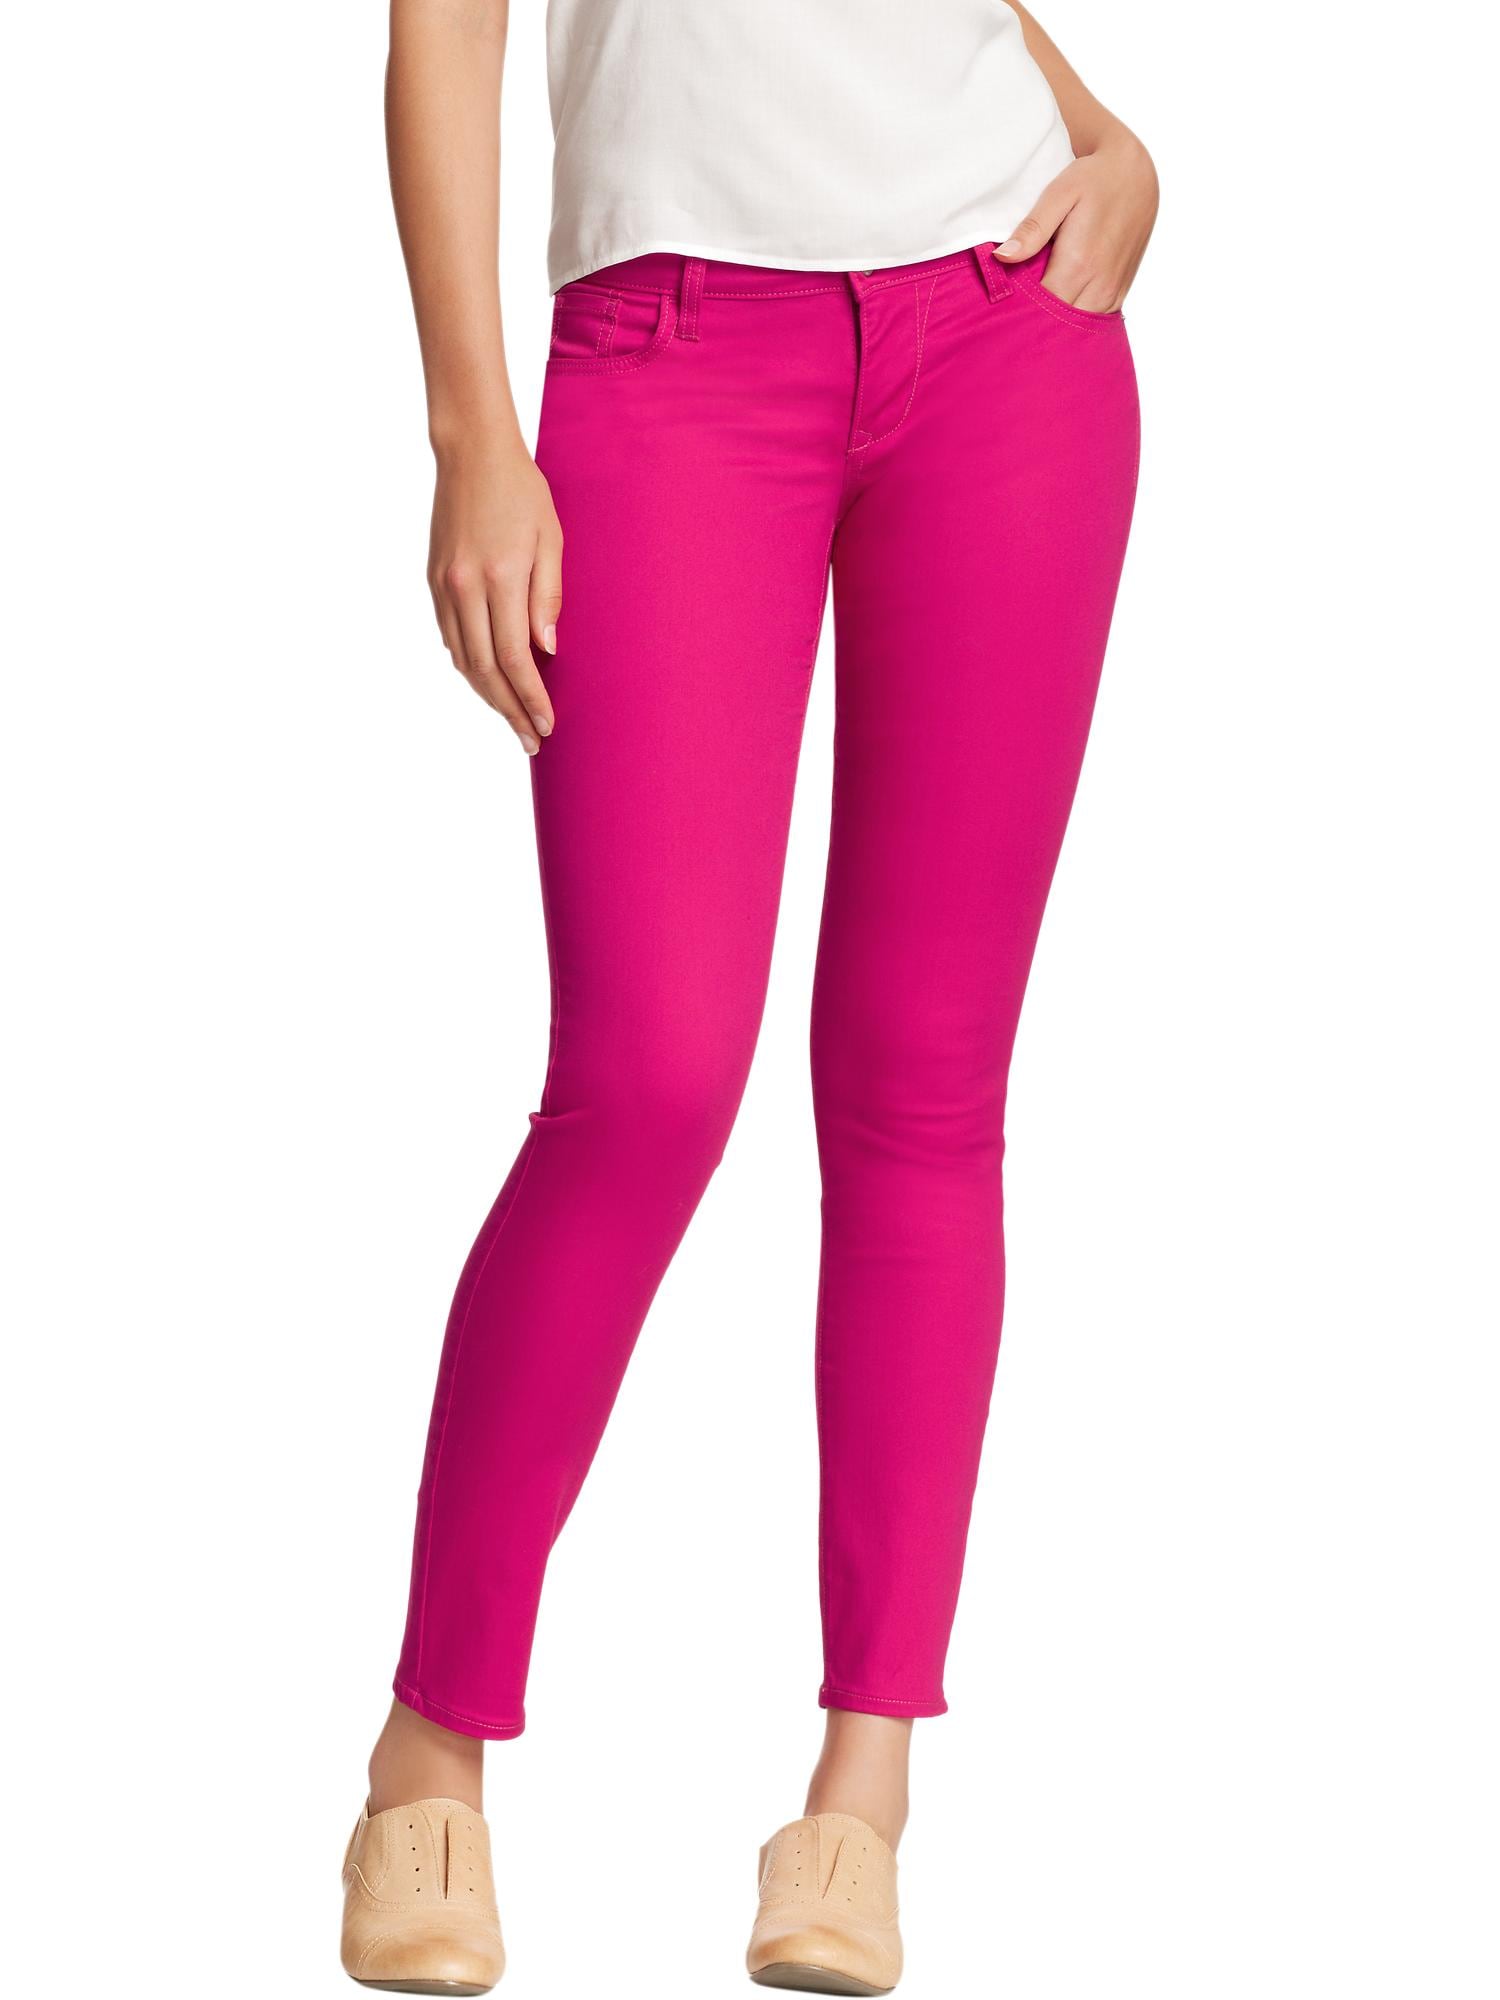 Low-Rise Rockstar Super Skinny Jeans for Women | Old Navy